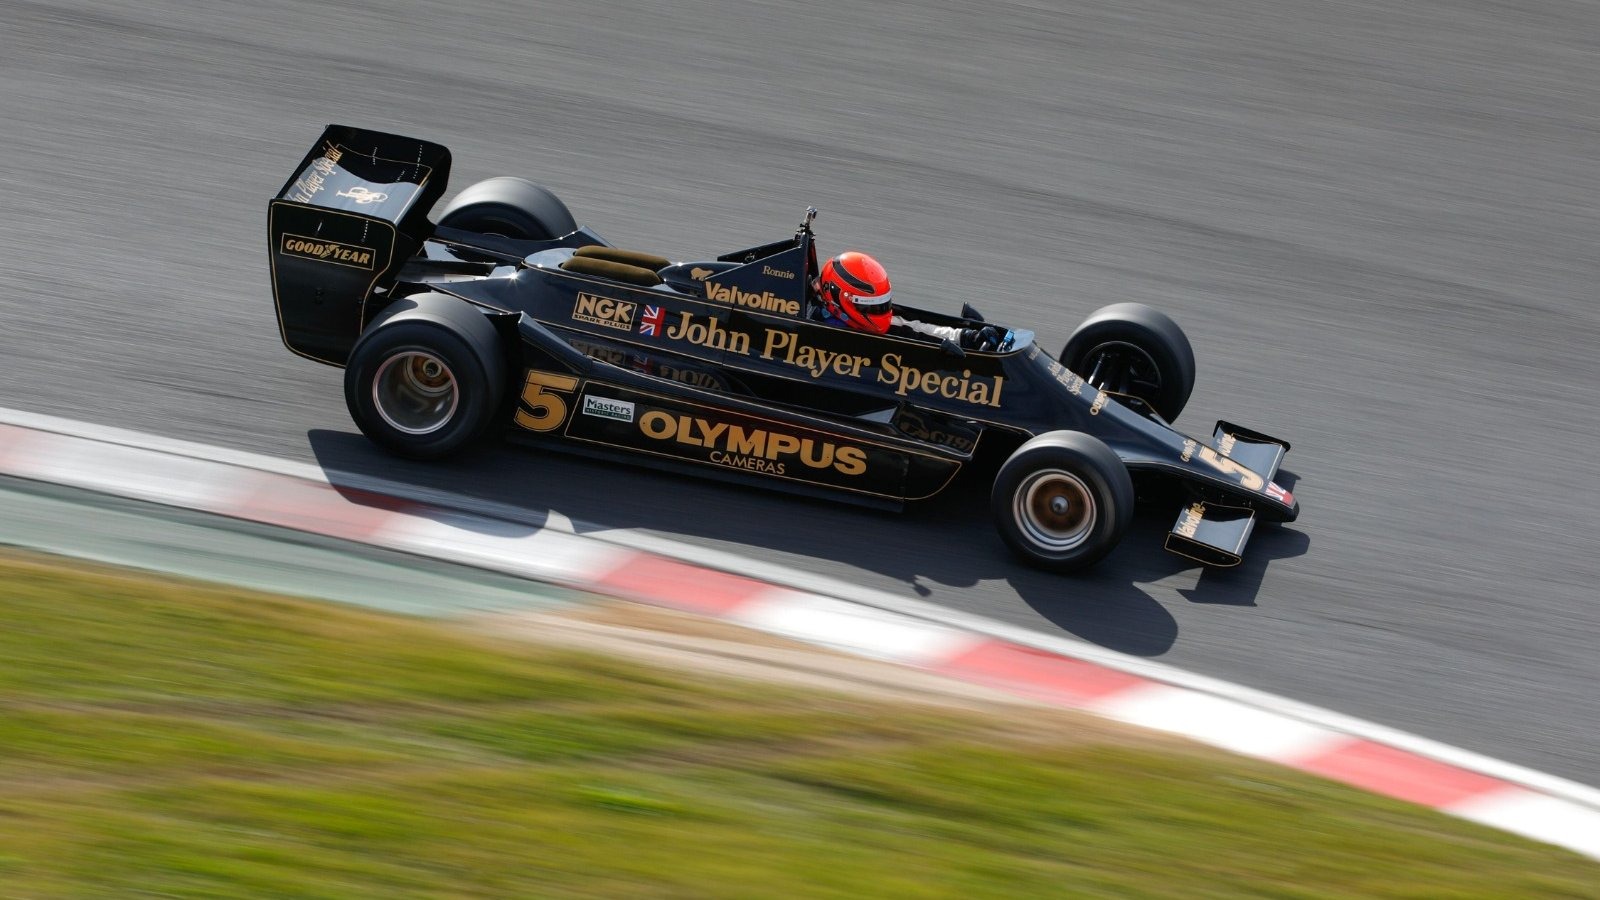 Mario Andretti's Lotus 79 which is up for sale. Suzuka, November 2018